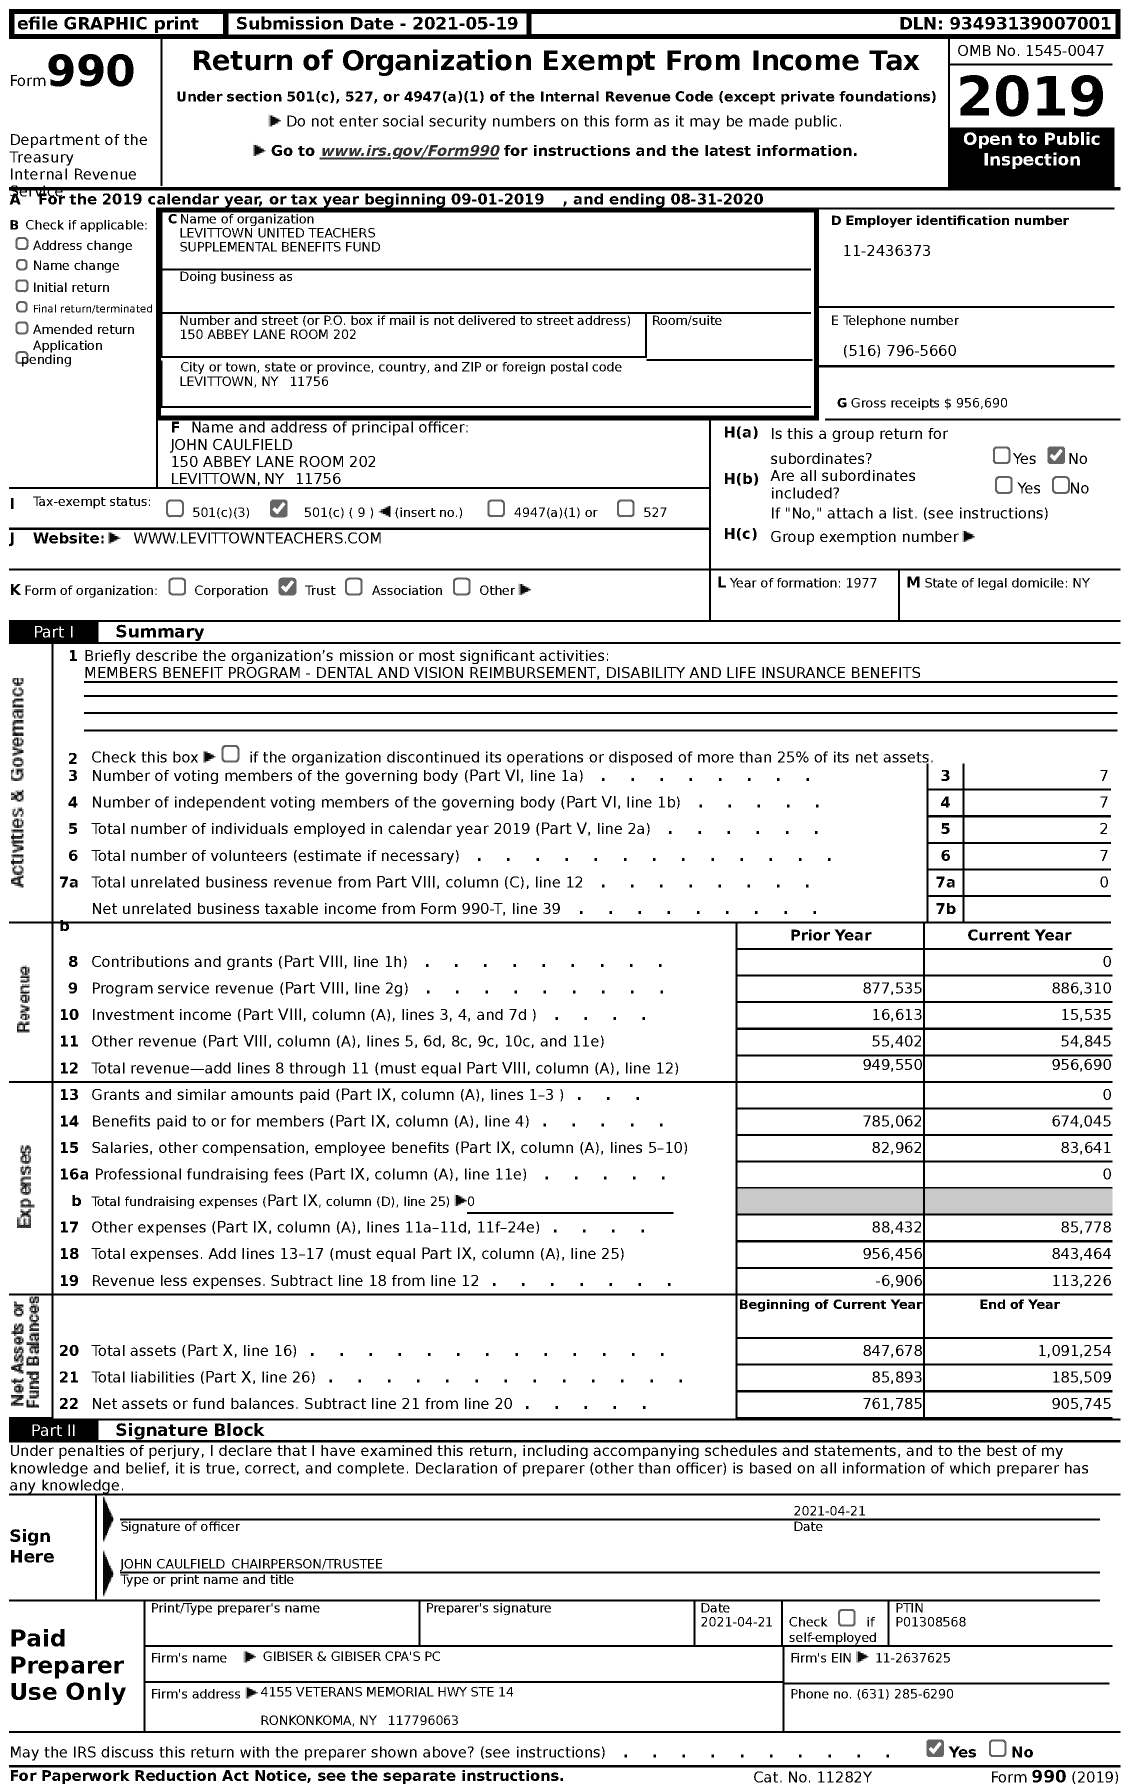 Image of first page of 2019 Form 990 for Levittown United Teachers Supplemental Benefits Fund